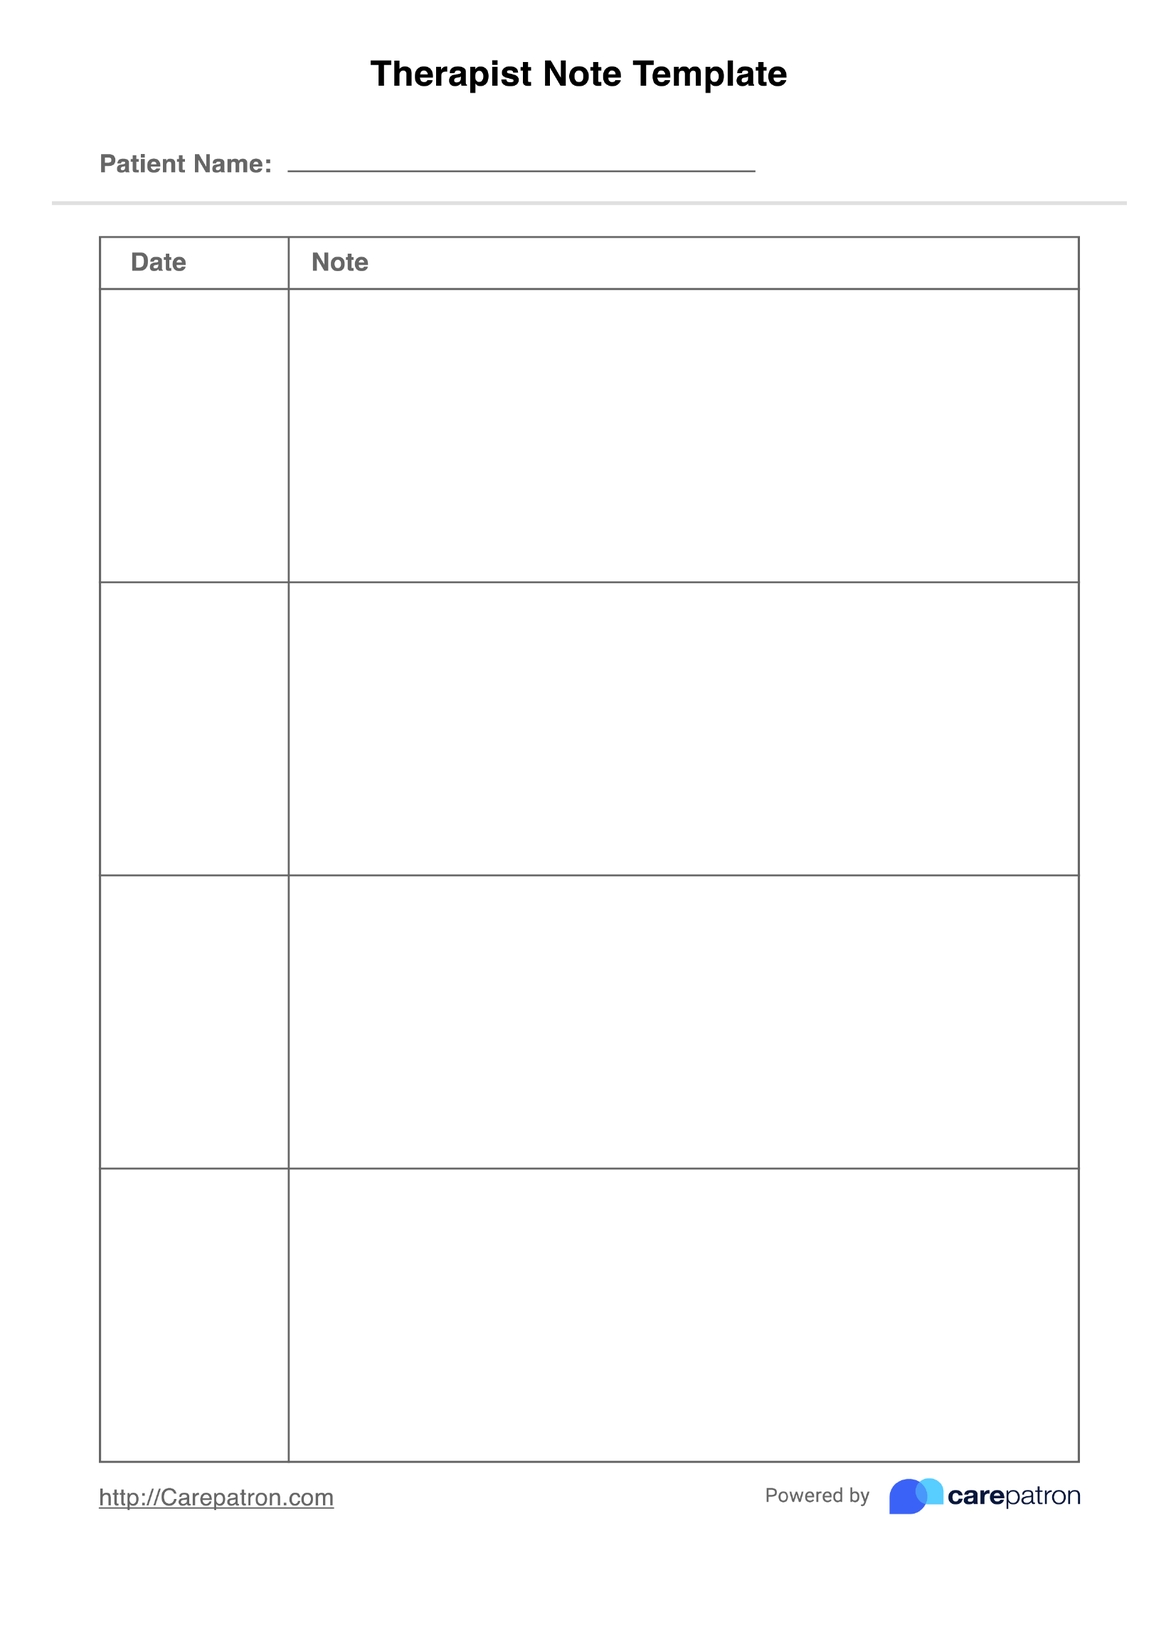 Therapist Notes Template PDF Example